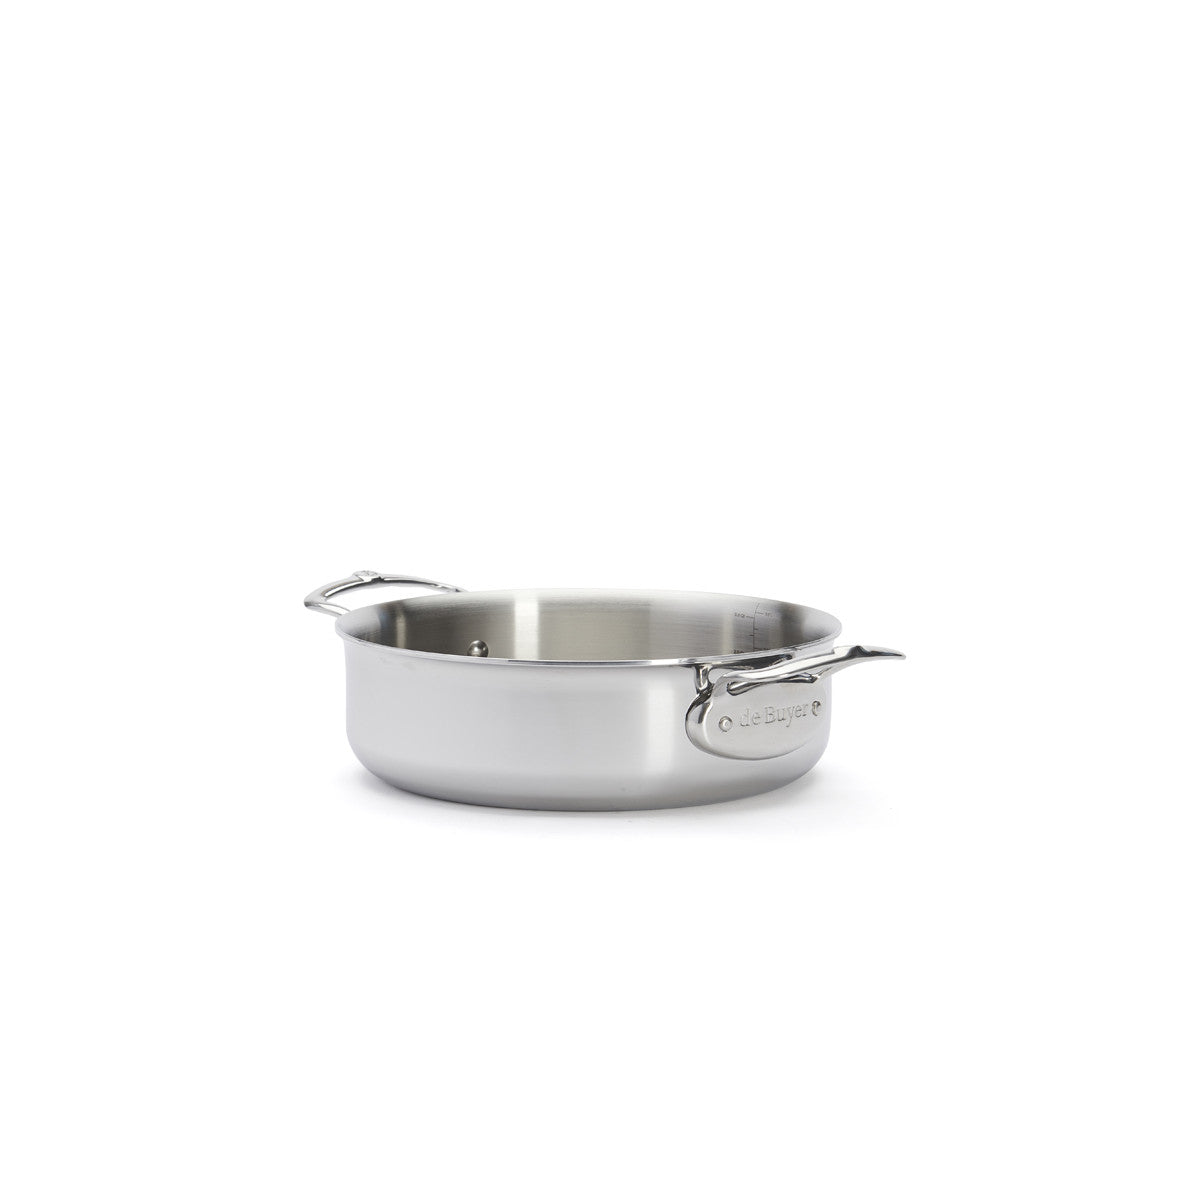 De Buyer Affinity sauteuse with two handles and lid